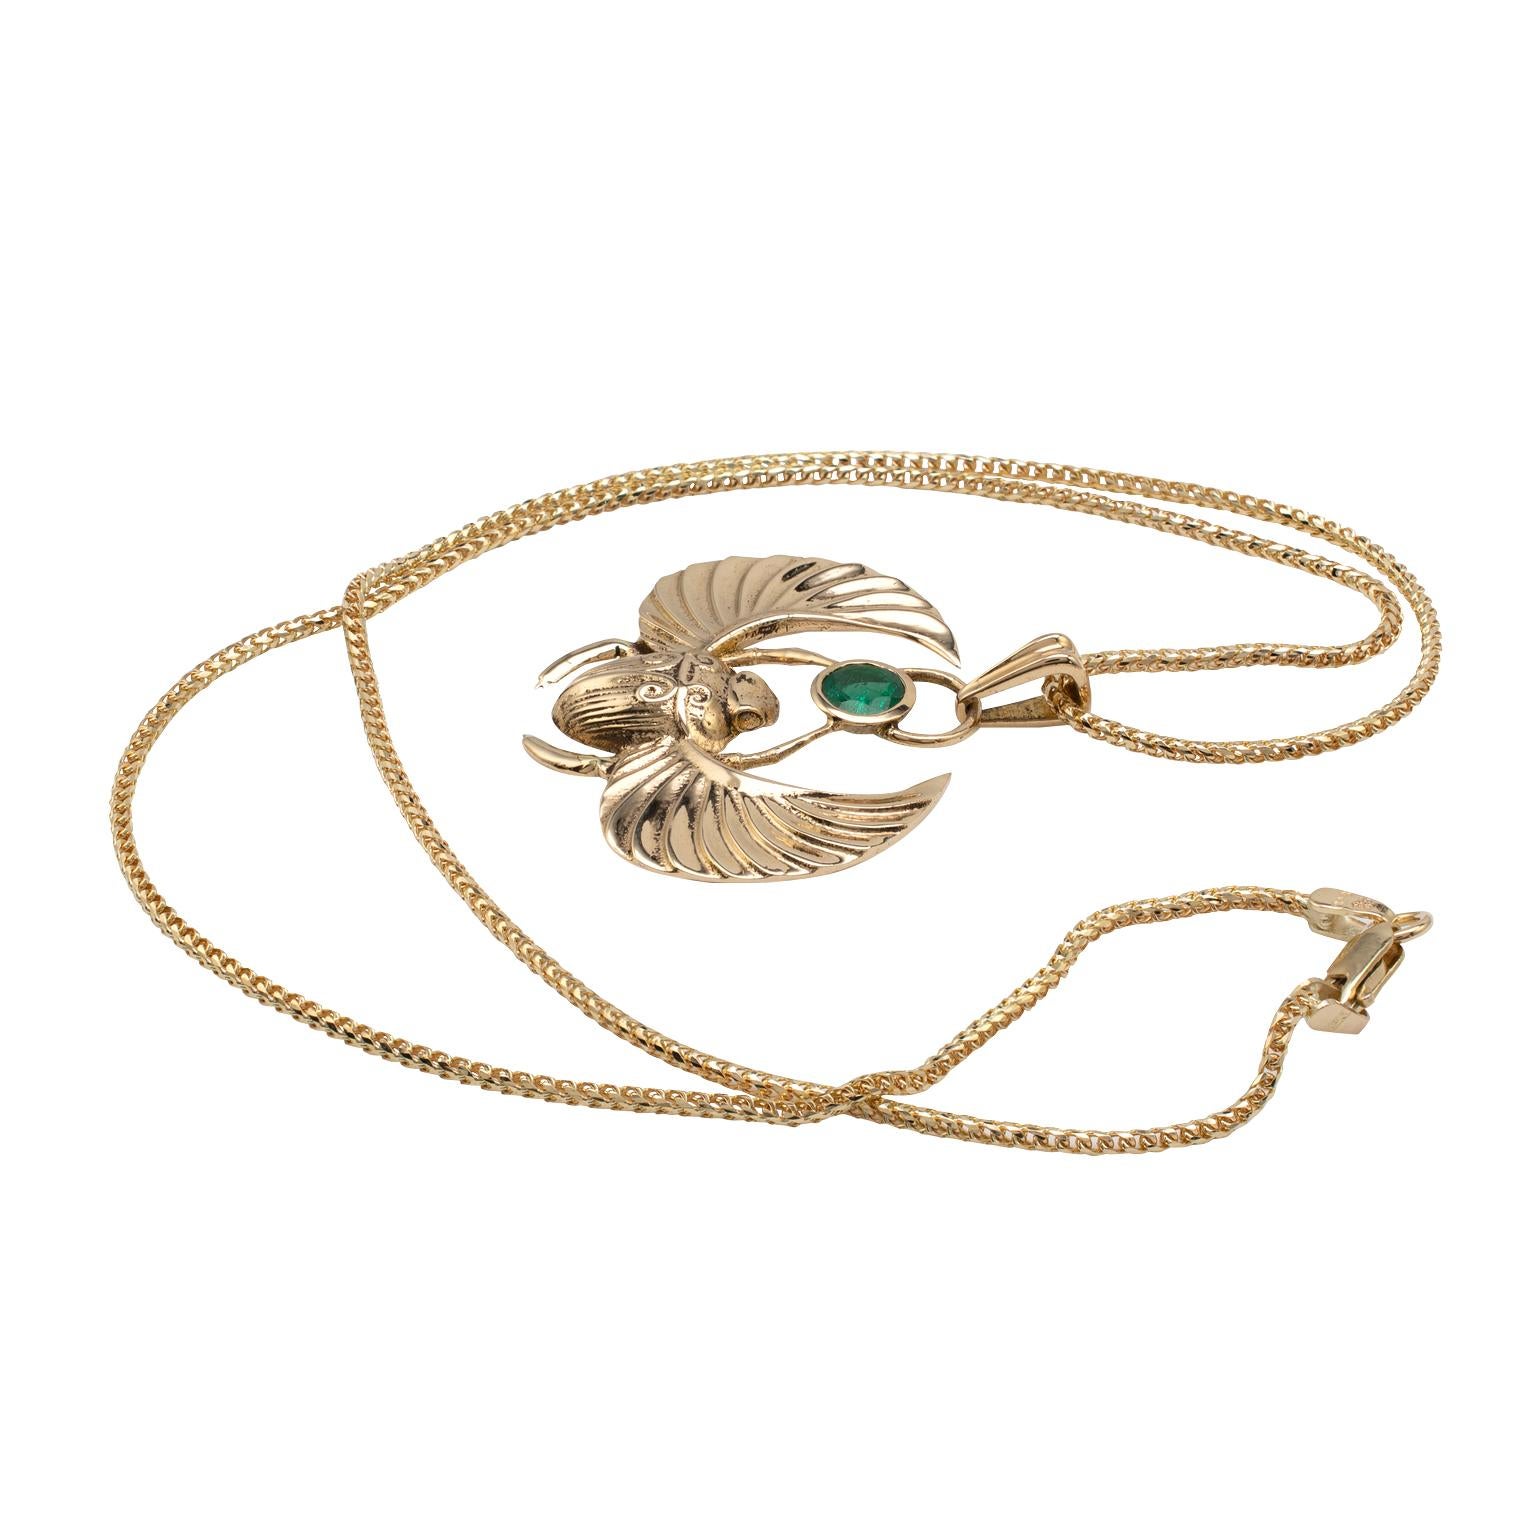 This Egyptian revival Winged Scarab Beetle pendant, fully hallmarked for 14 karat yellow gold, features a beautiful 0.50 carat round cut natural emerald gemstone. 

The custom made his piece displays full UK hallmarks and is expertly modeled with